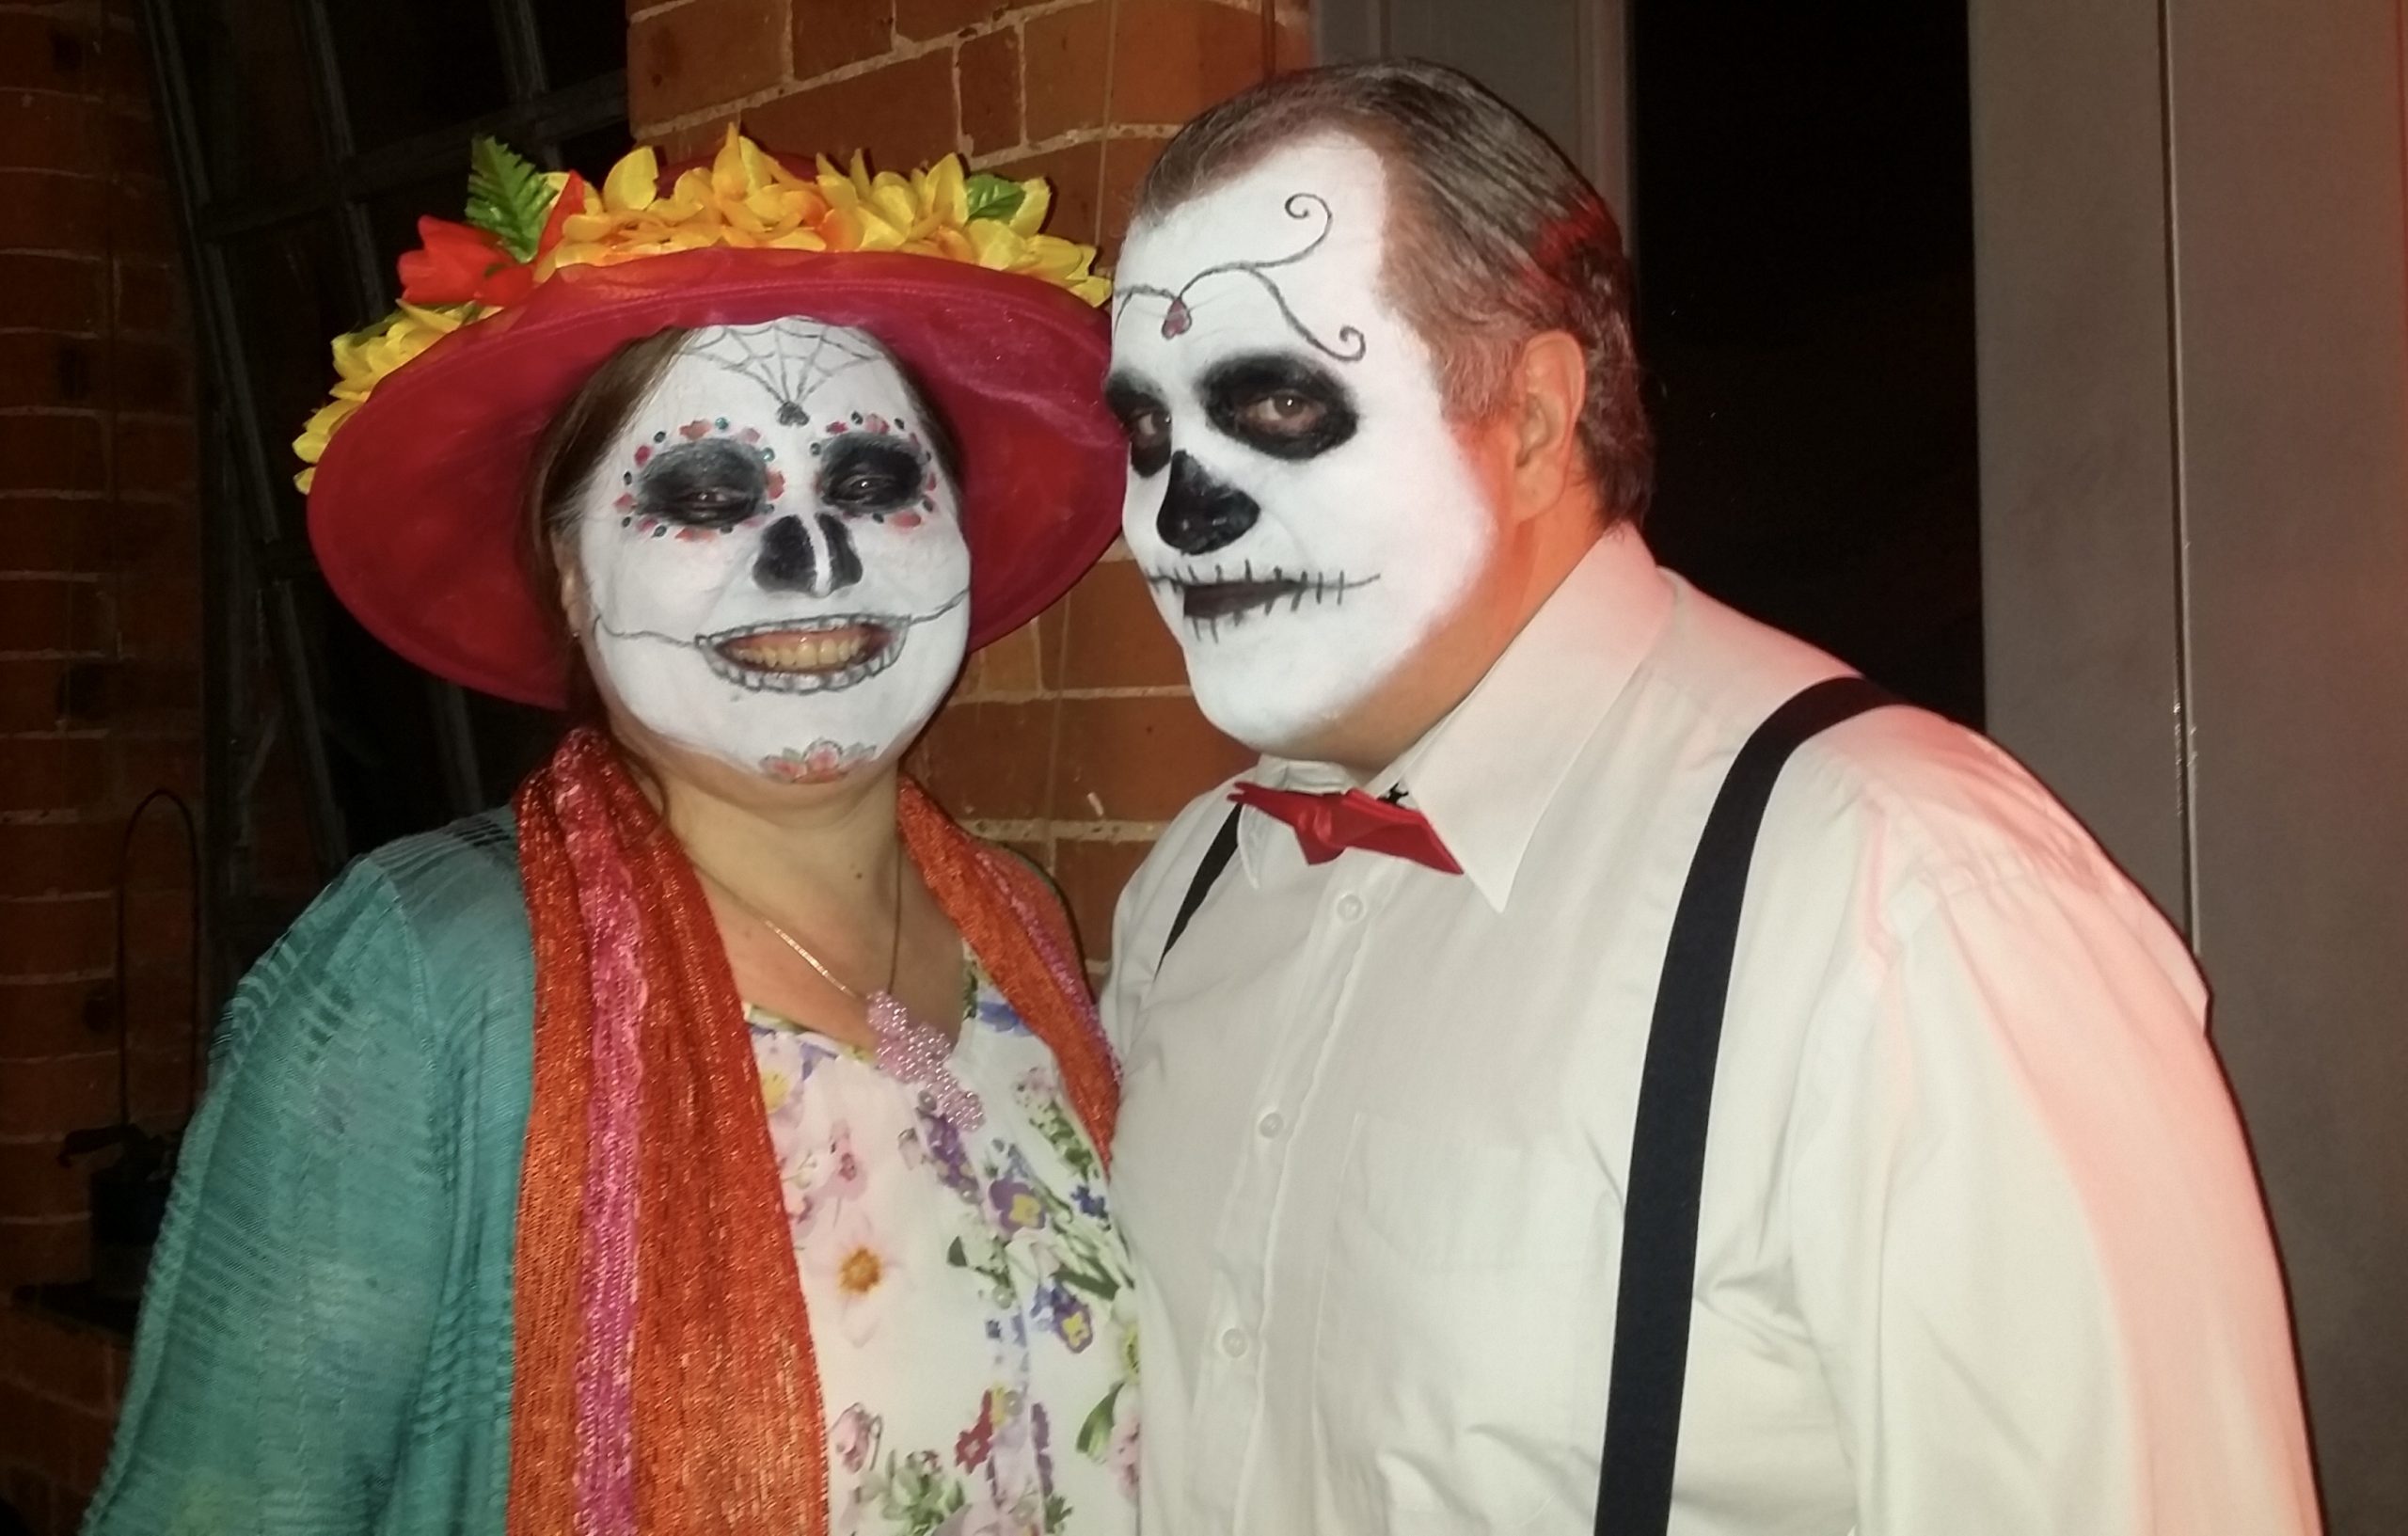 Colourful “Day of the Dead” inspired couples Halloween costumes